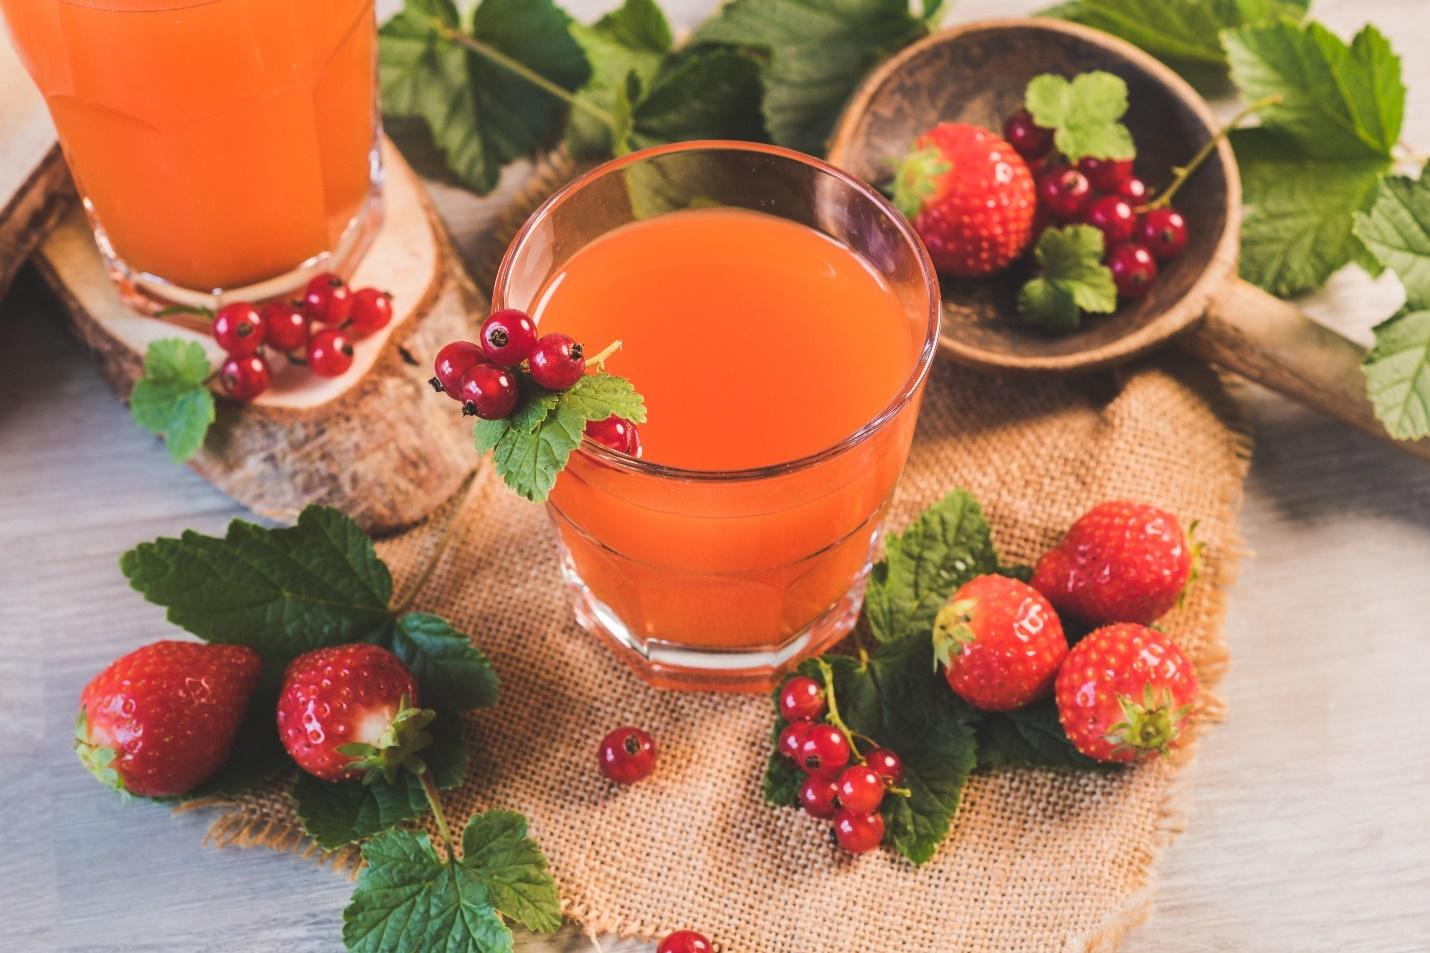 Recipes with fresh fruit juices